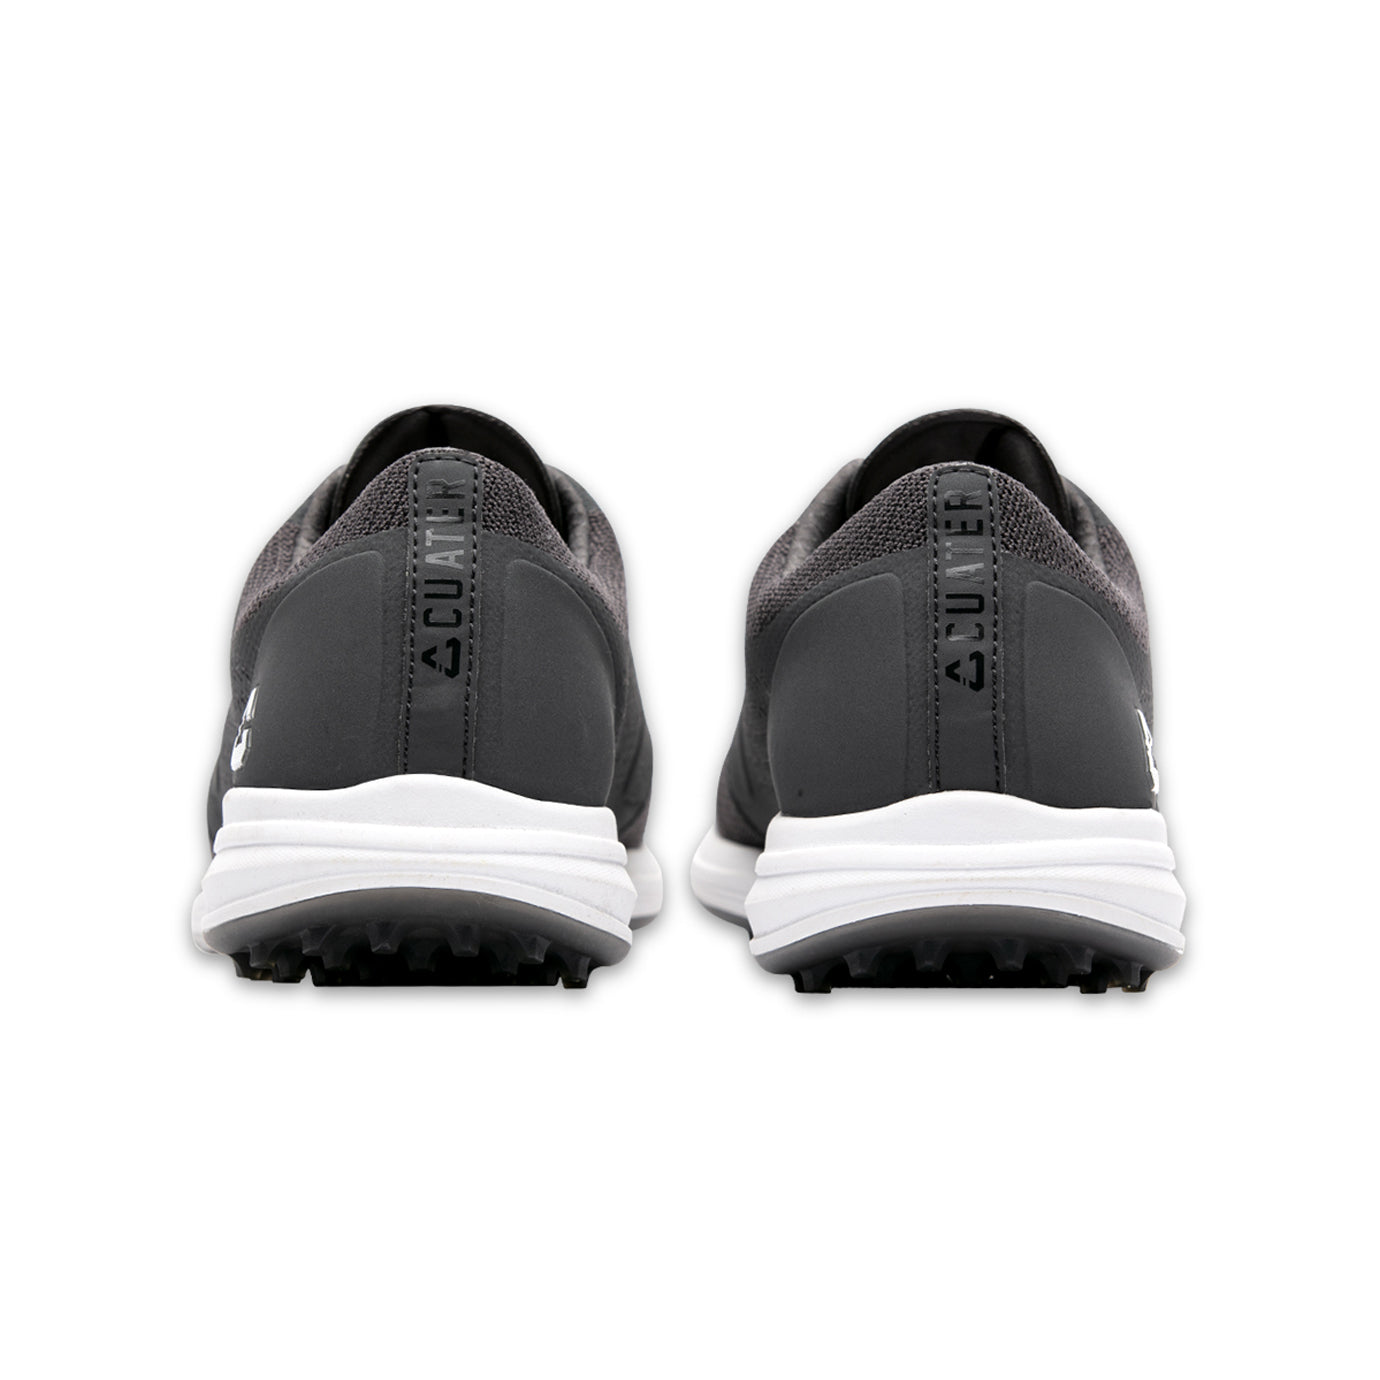 cuater-the-money-maker-golf-shoes-4mr216-heather-grey-pinstripe